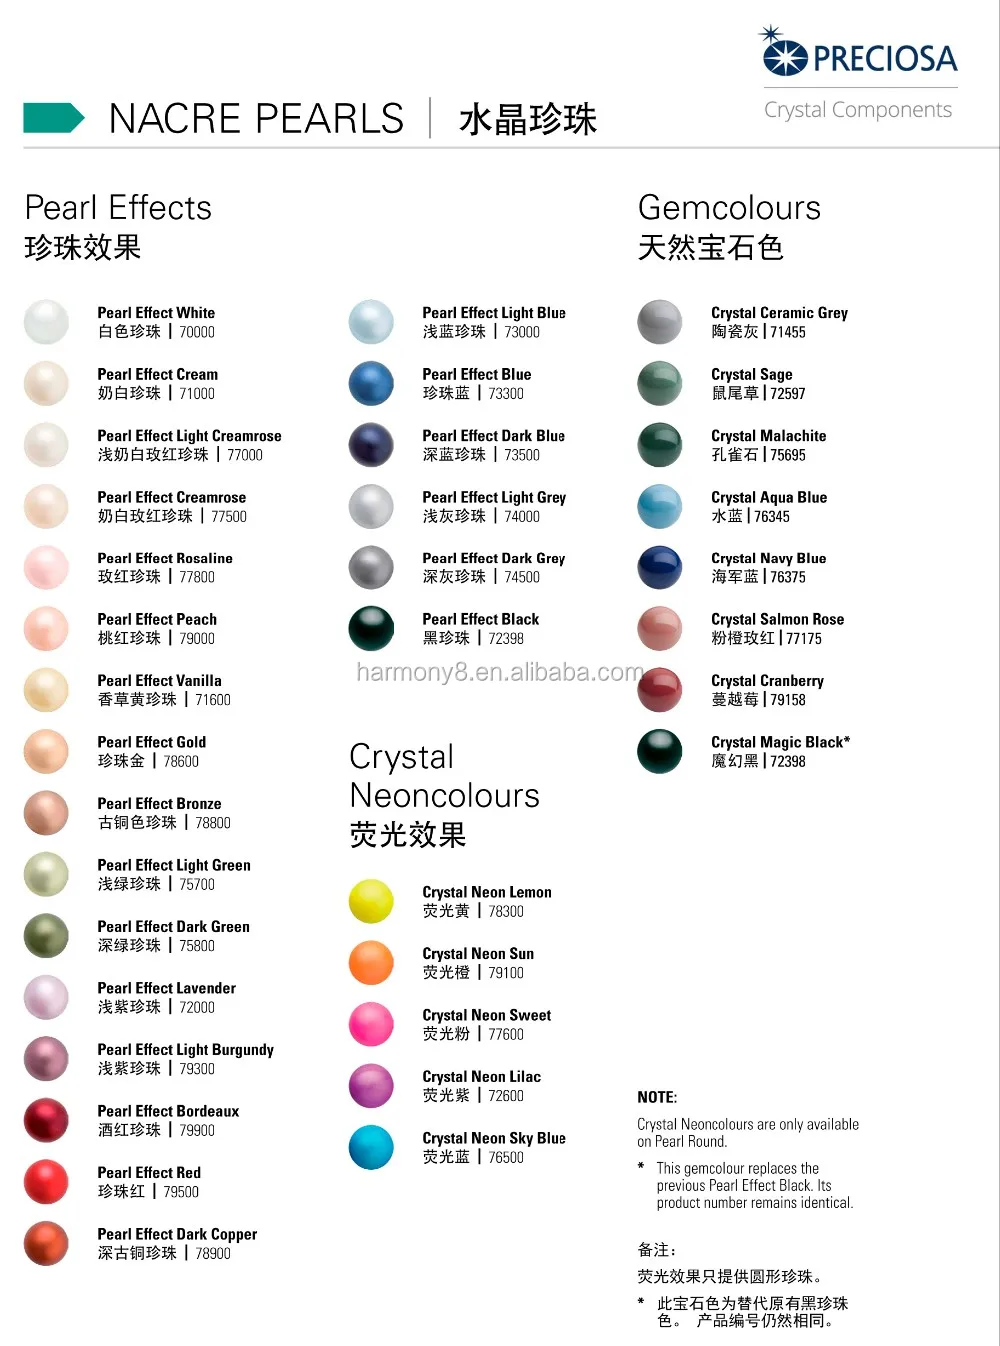 Pearl Color Chart